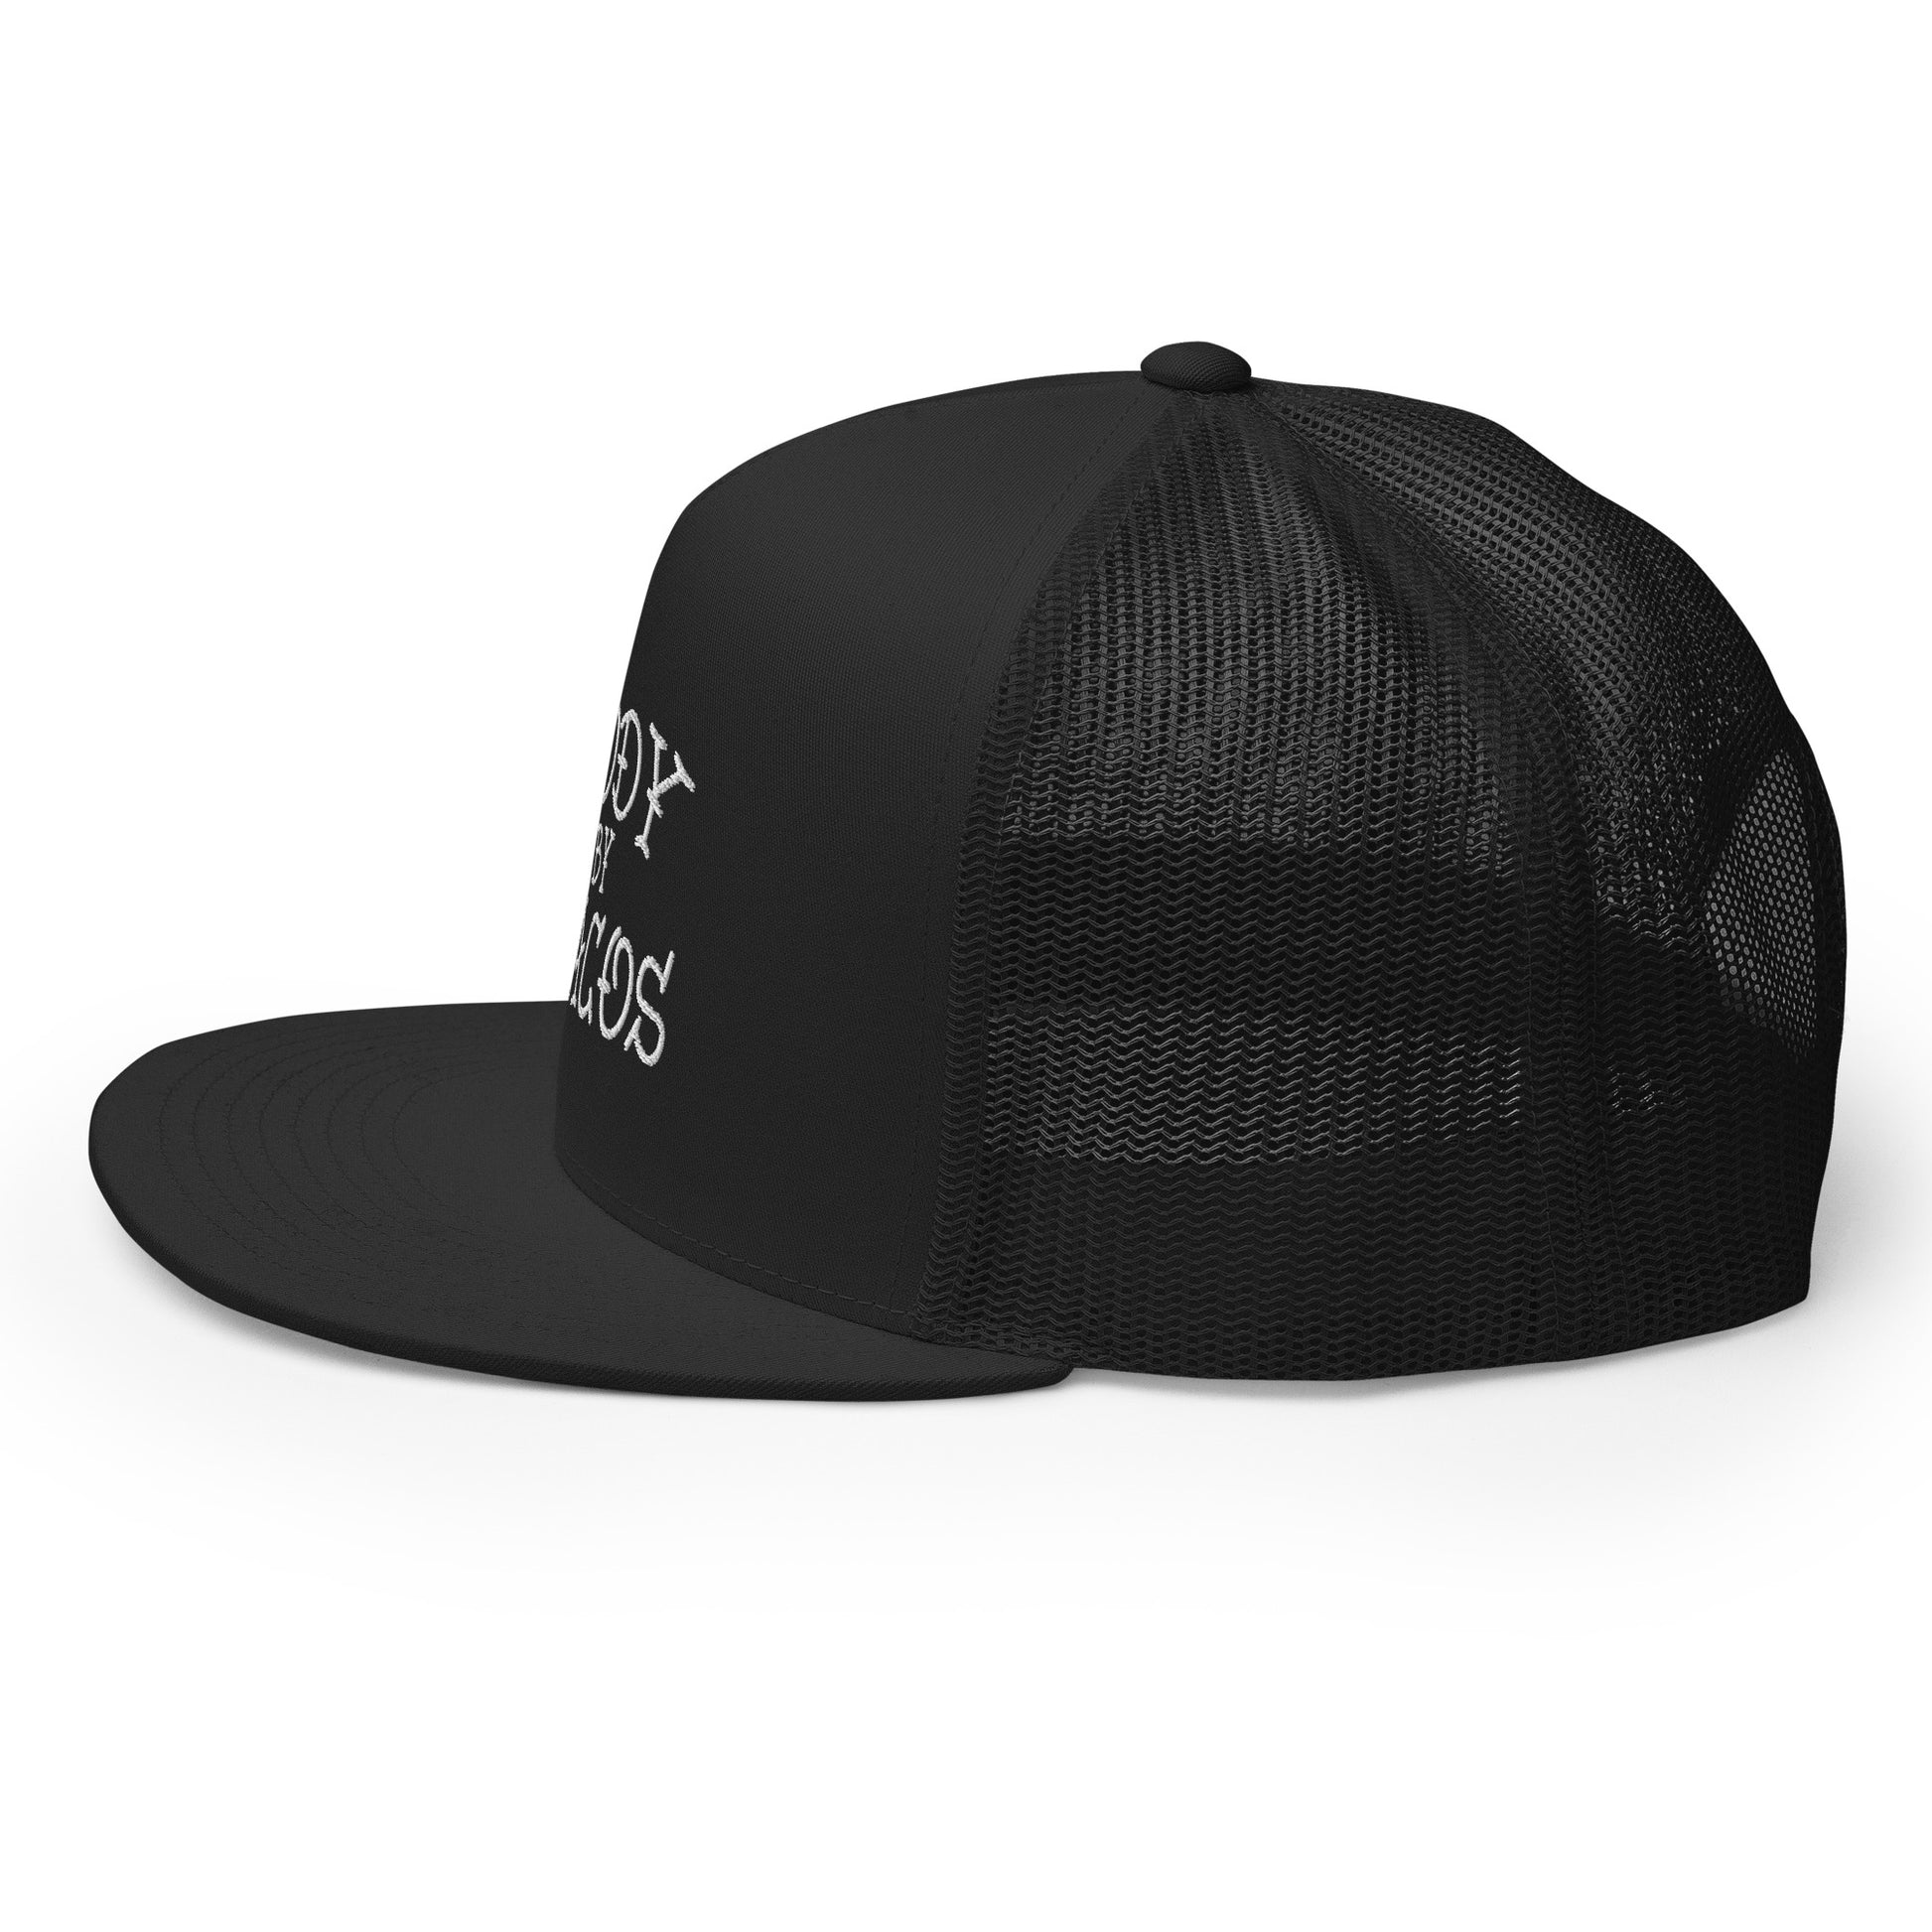 Black Body by Tacos trucker snapback with white text, featuring a flat bill and adjustable snapback closure.